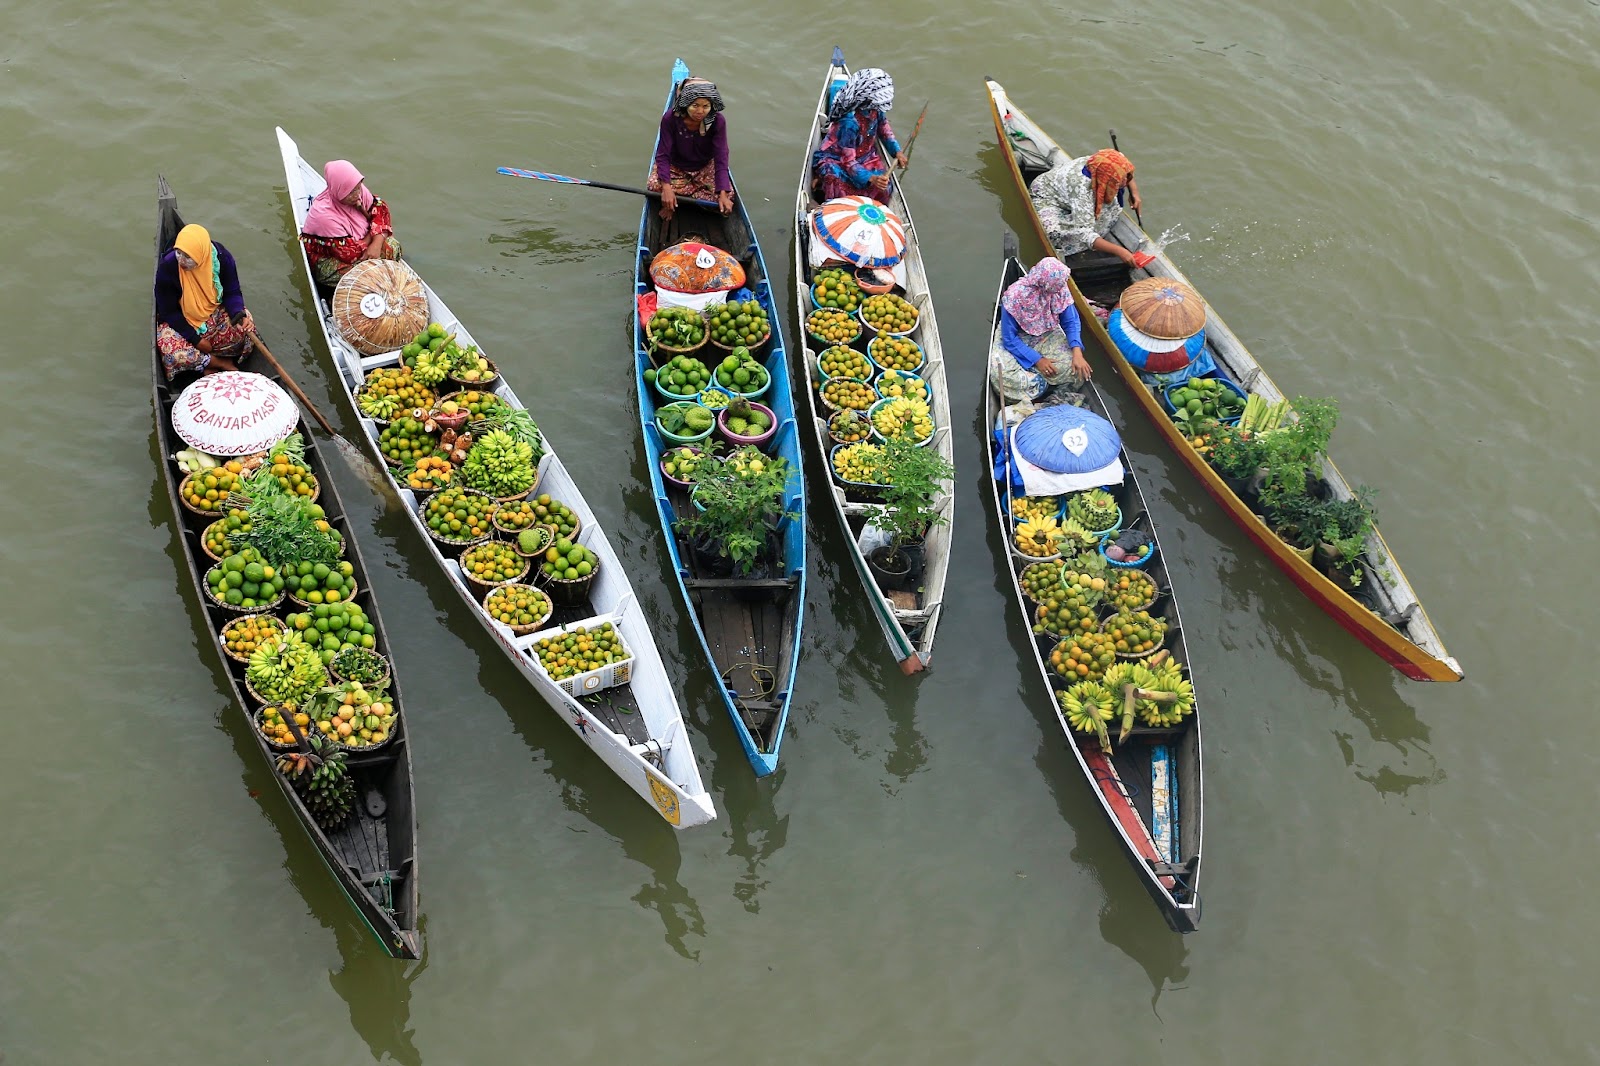 Vibrant Mekong Culture - Locals trading goods at a bustling floating market.
